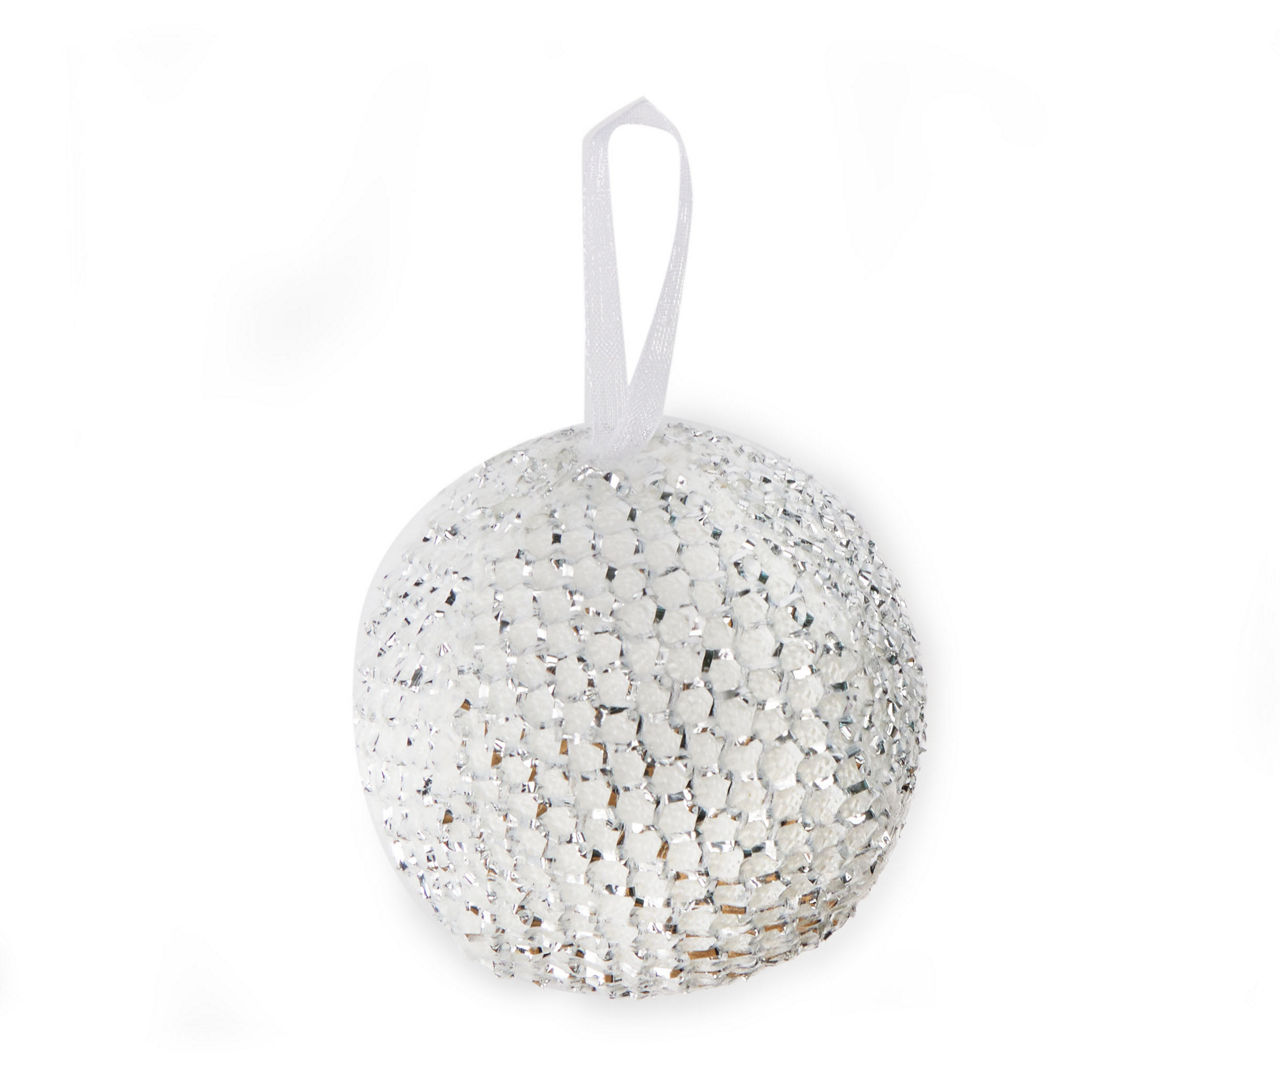 Silver Net Fabric Ball Ornaments, 6-Pack